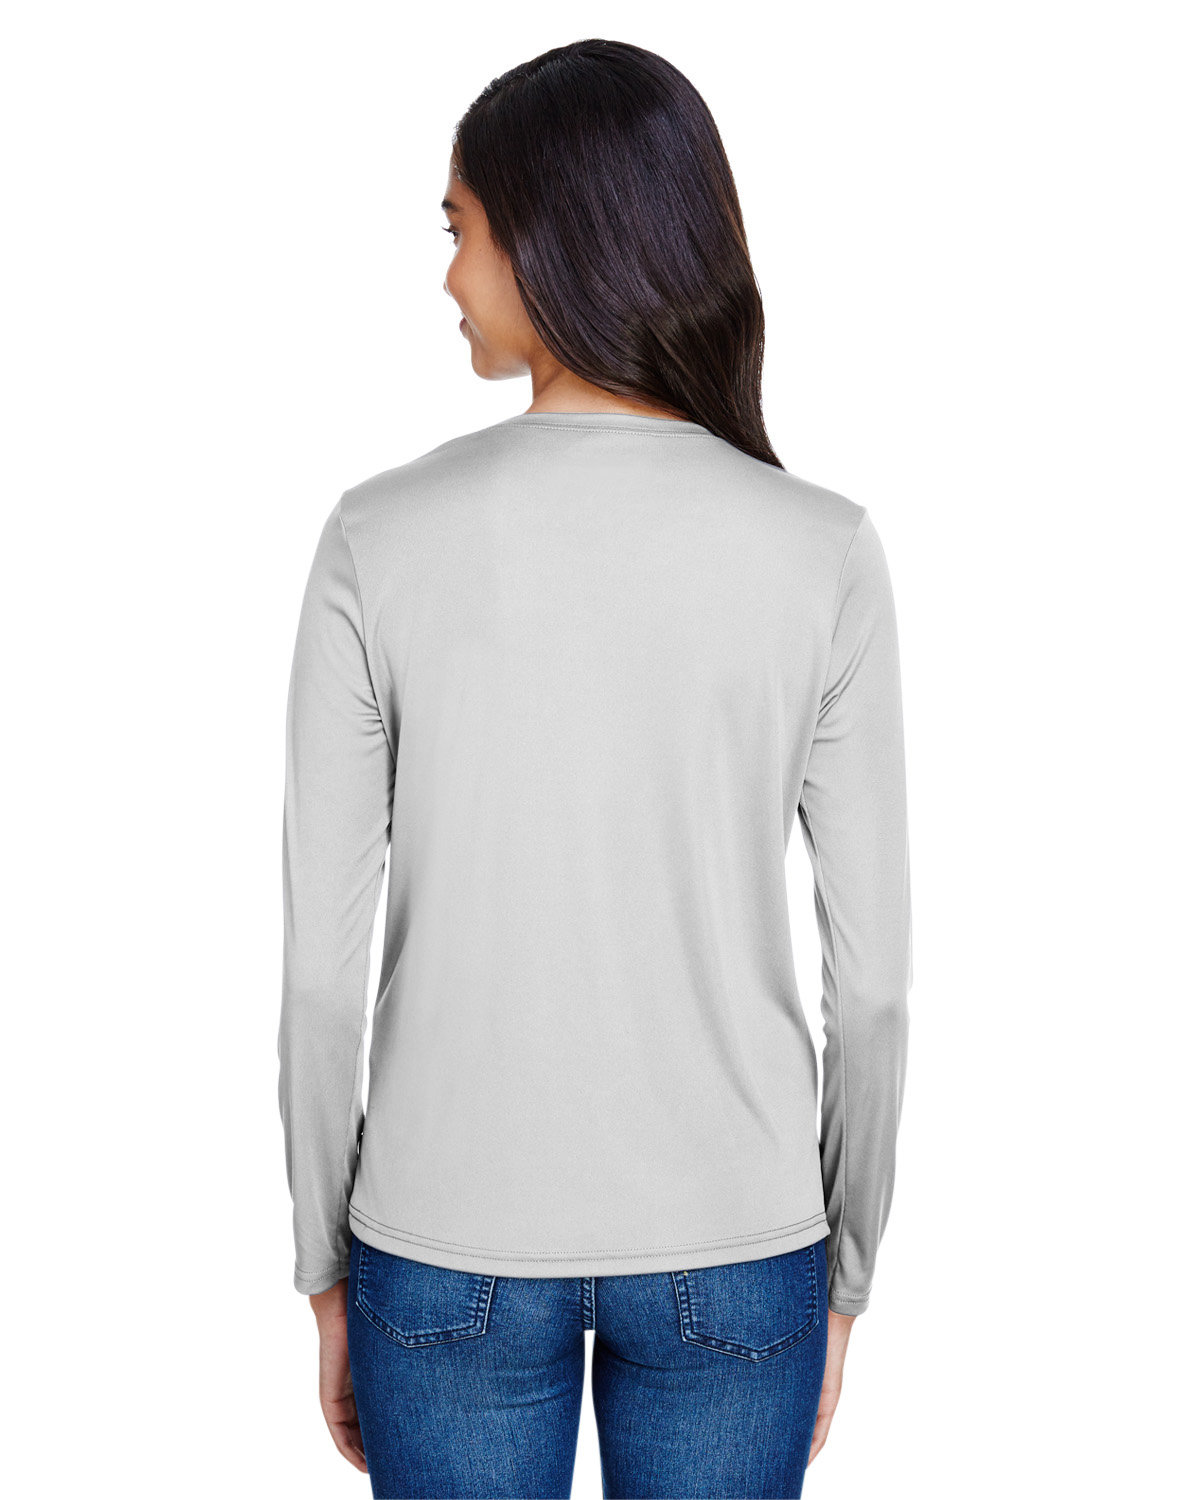 A4 Ladies' Long Sleeve Cooling Performance Crew Shirt | alphabroder